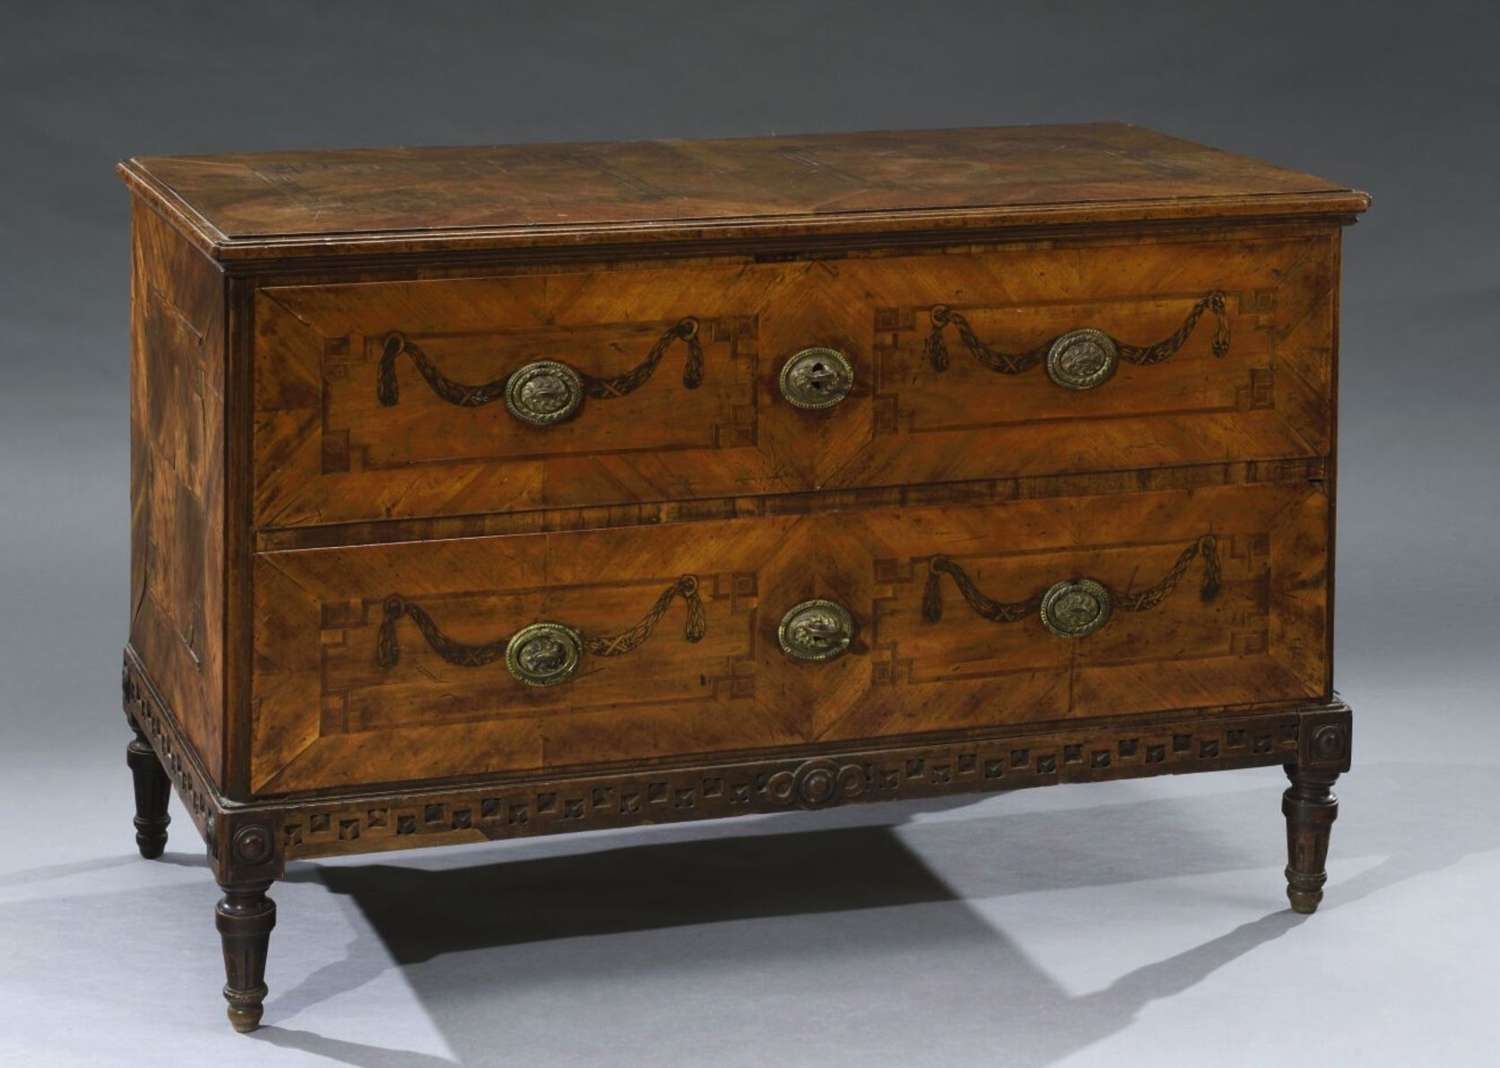 A RARE LATE 18TH CENTURY MARQUETRY COMMODE.